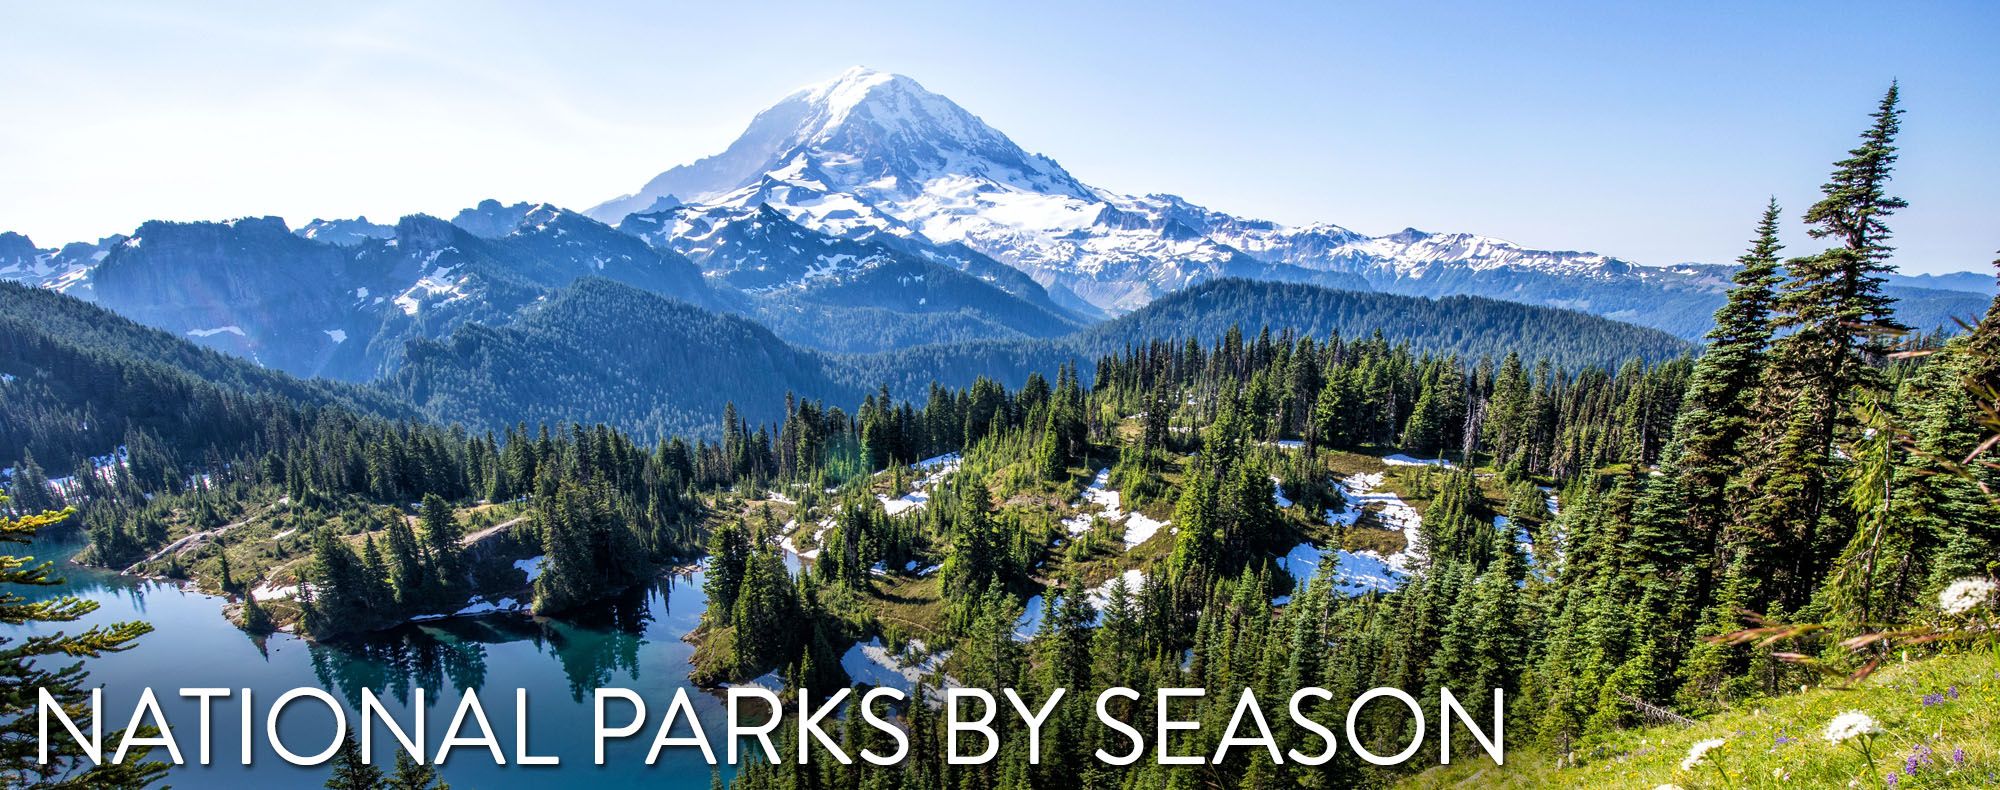 National Parks by Season